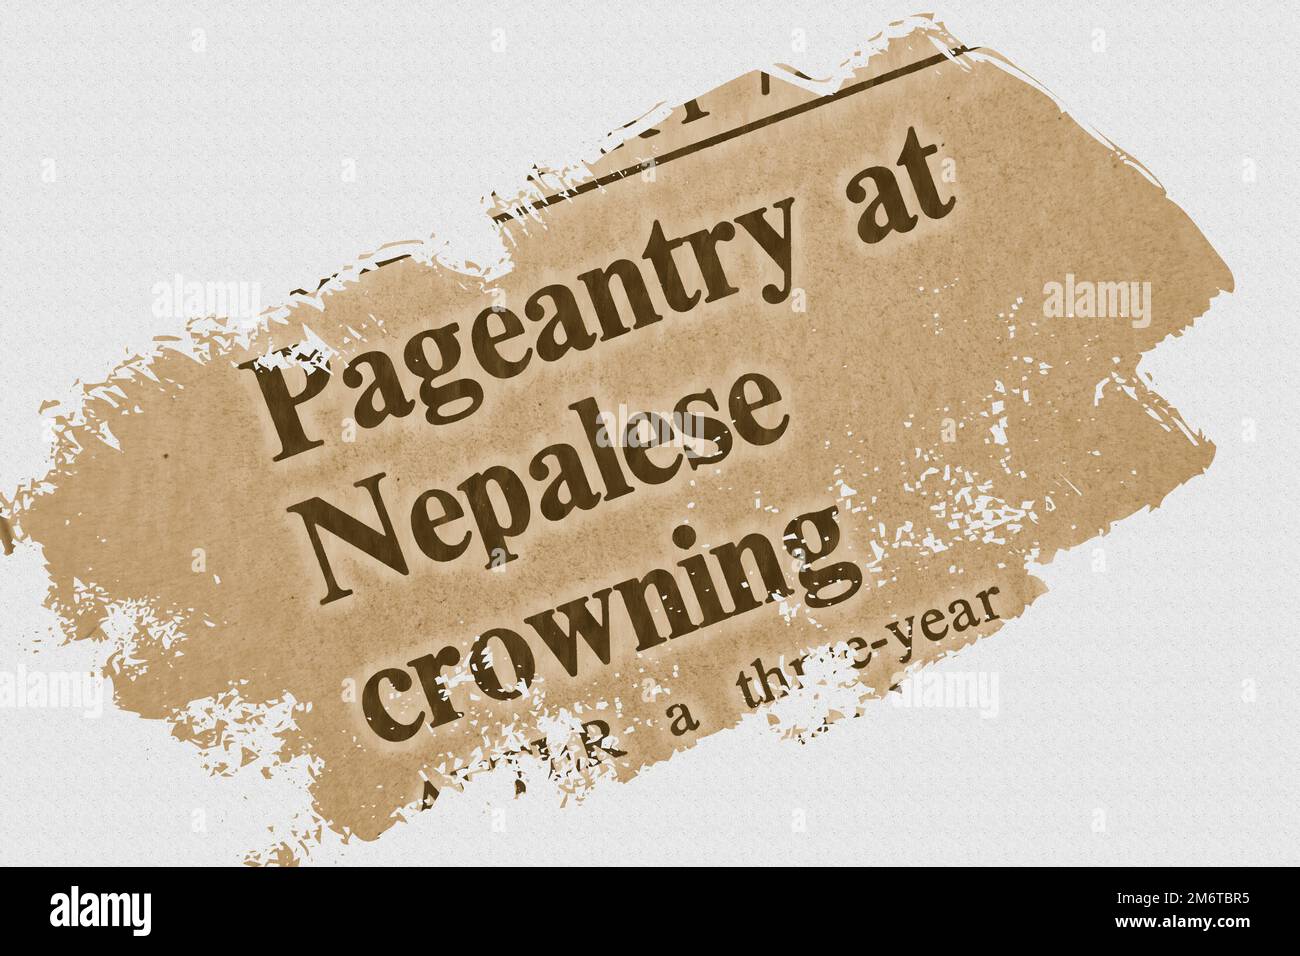 Pageantry at nepalese crowning - news story from 1975 newspaper headline article title with overlay highlight Stock Photo